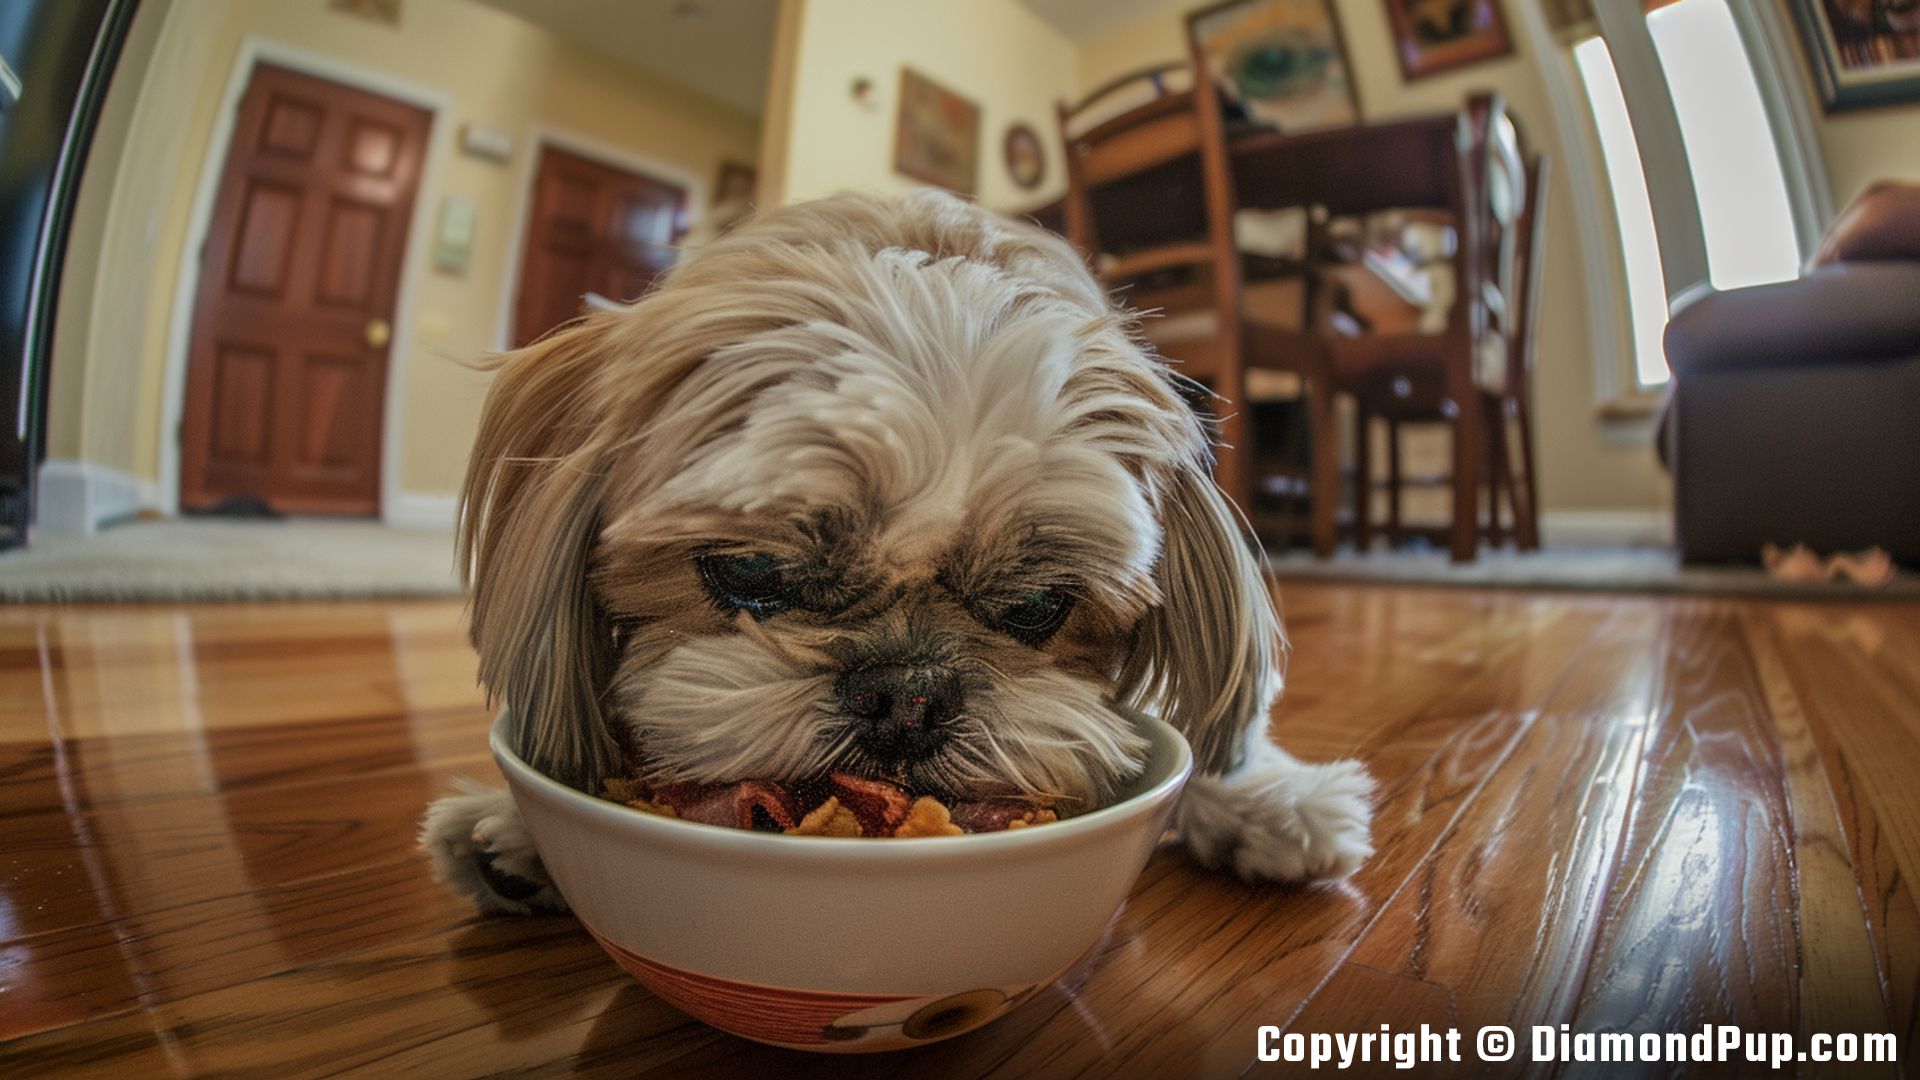 Photograph of a Playful Shih Tzu Snacking on Bacon